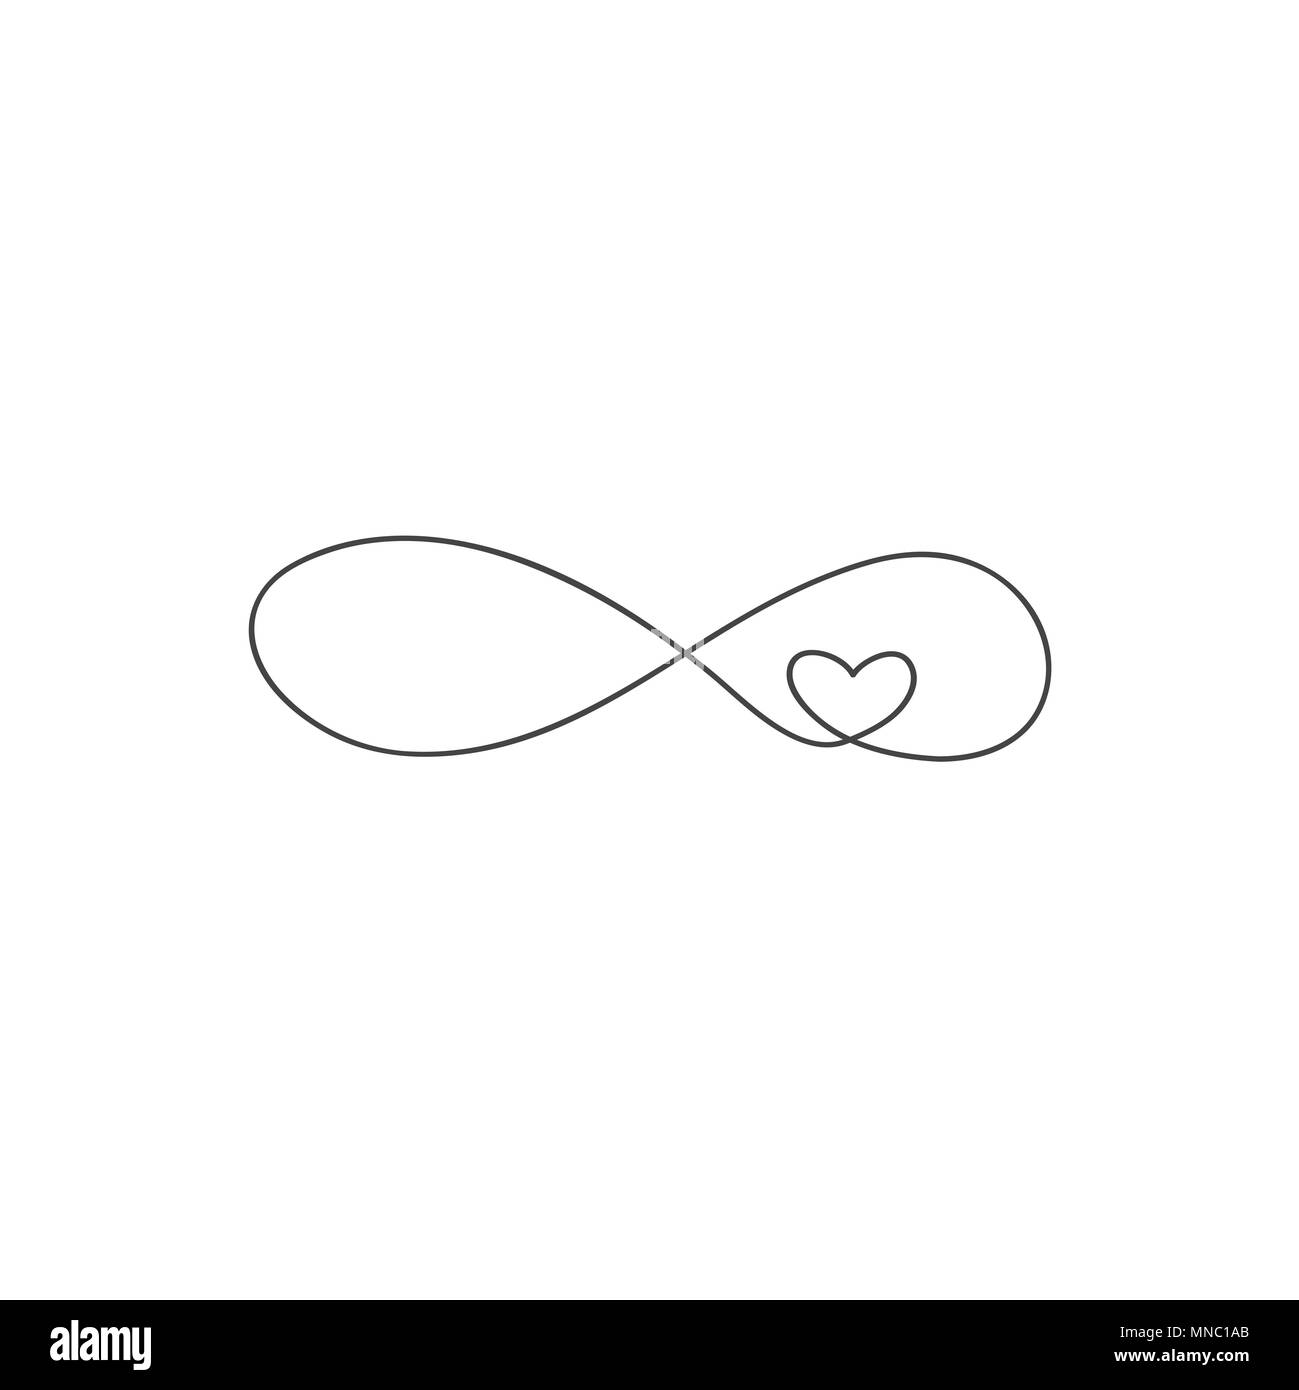 Sign Of Infinity And Heart Icon Element Of Wedding For Mobile Concept And Web Apps Illustration